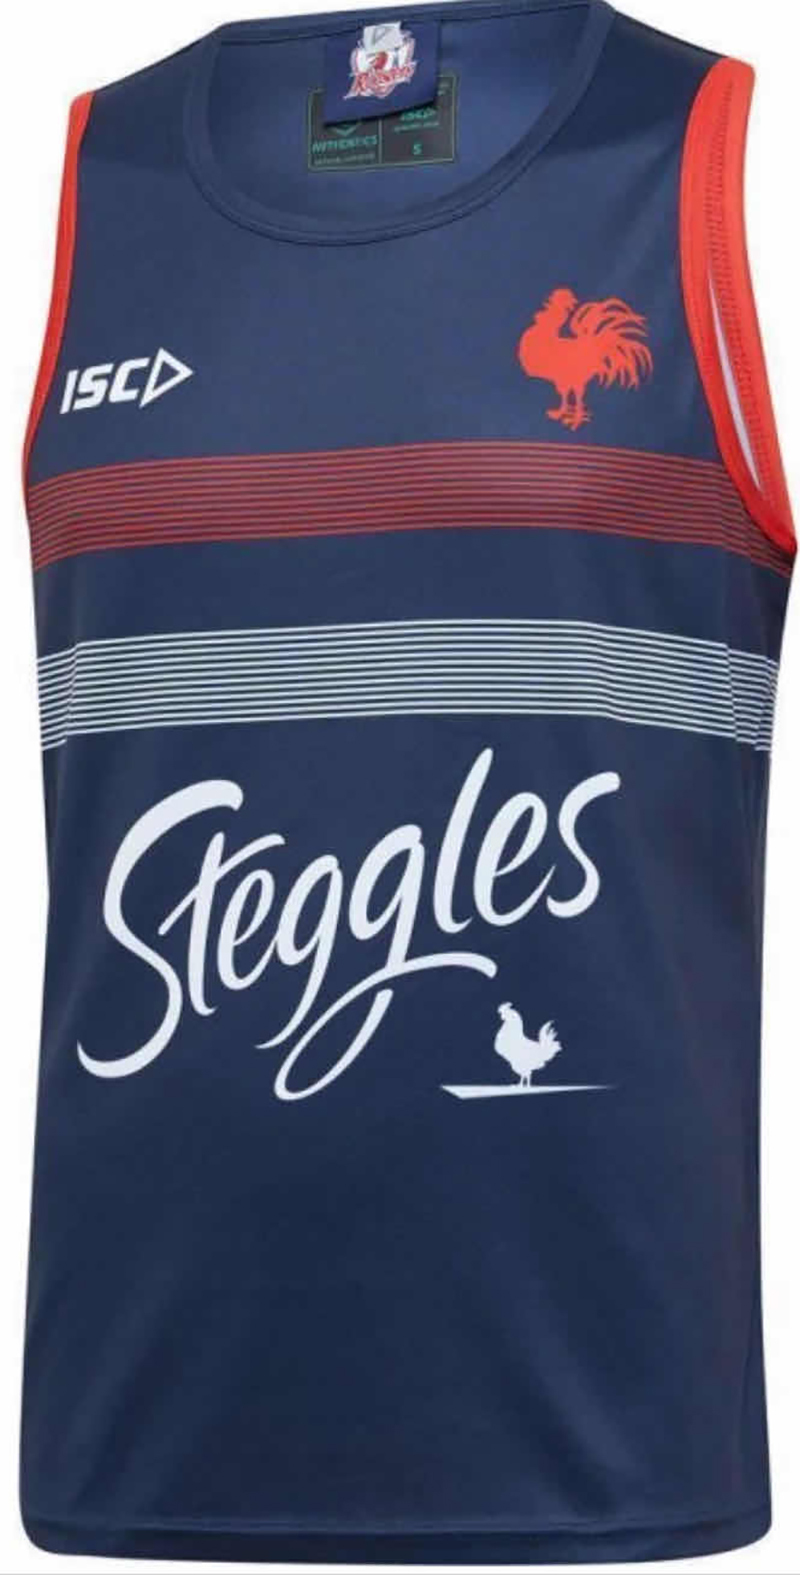 FRANCE singlet rugby jersey shirt S-3XL 